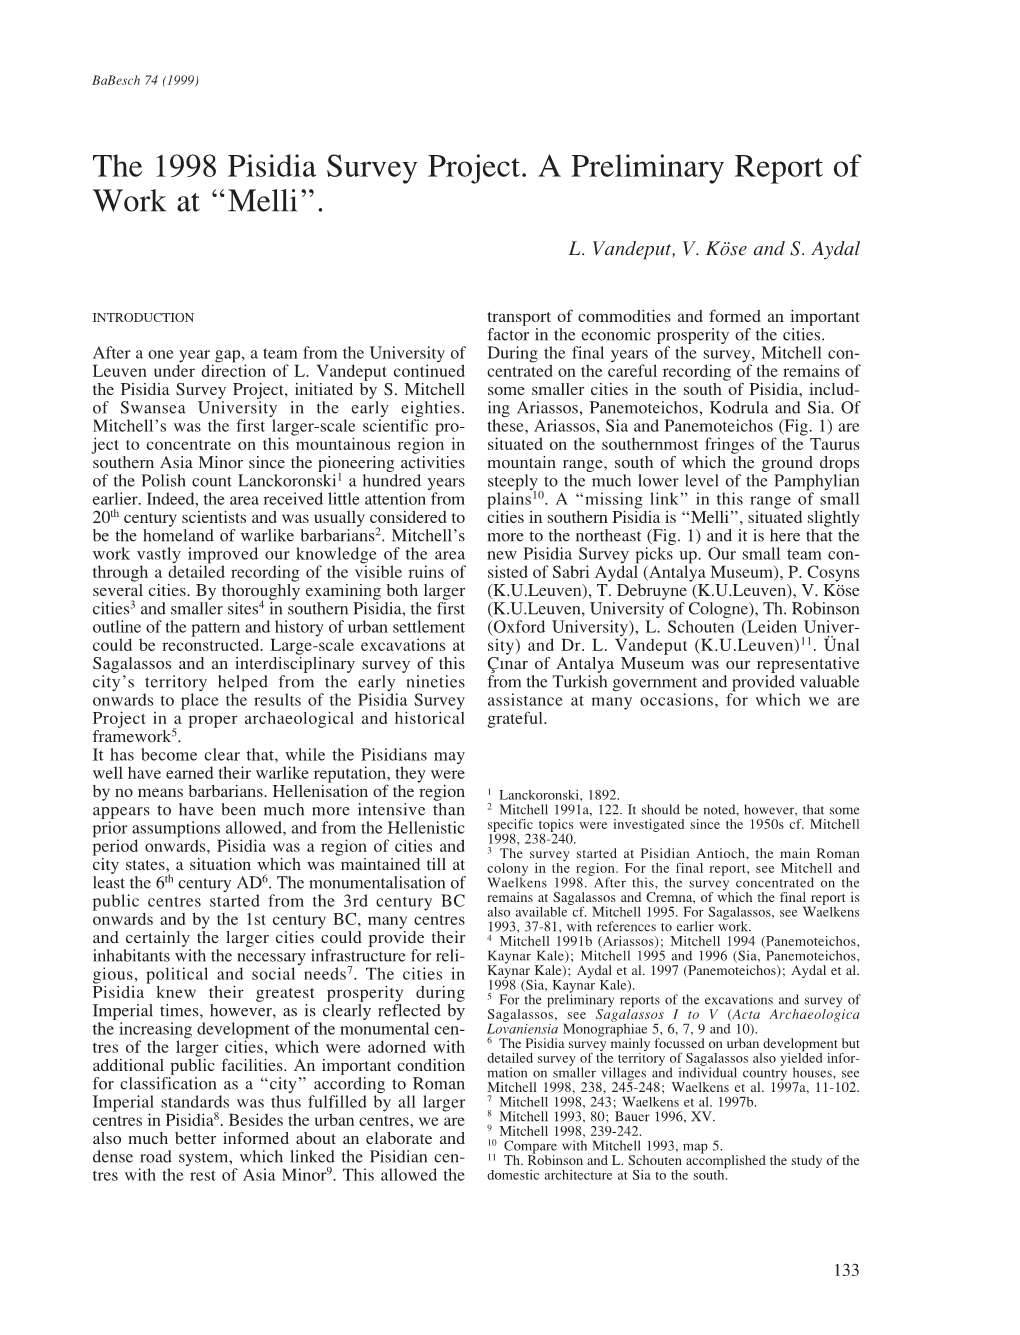 The 1998 Pisidia Survey Project. a Preliminary Report of Work at “Melli”